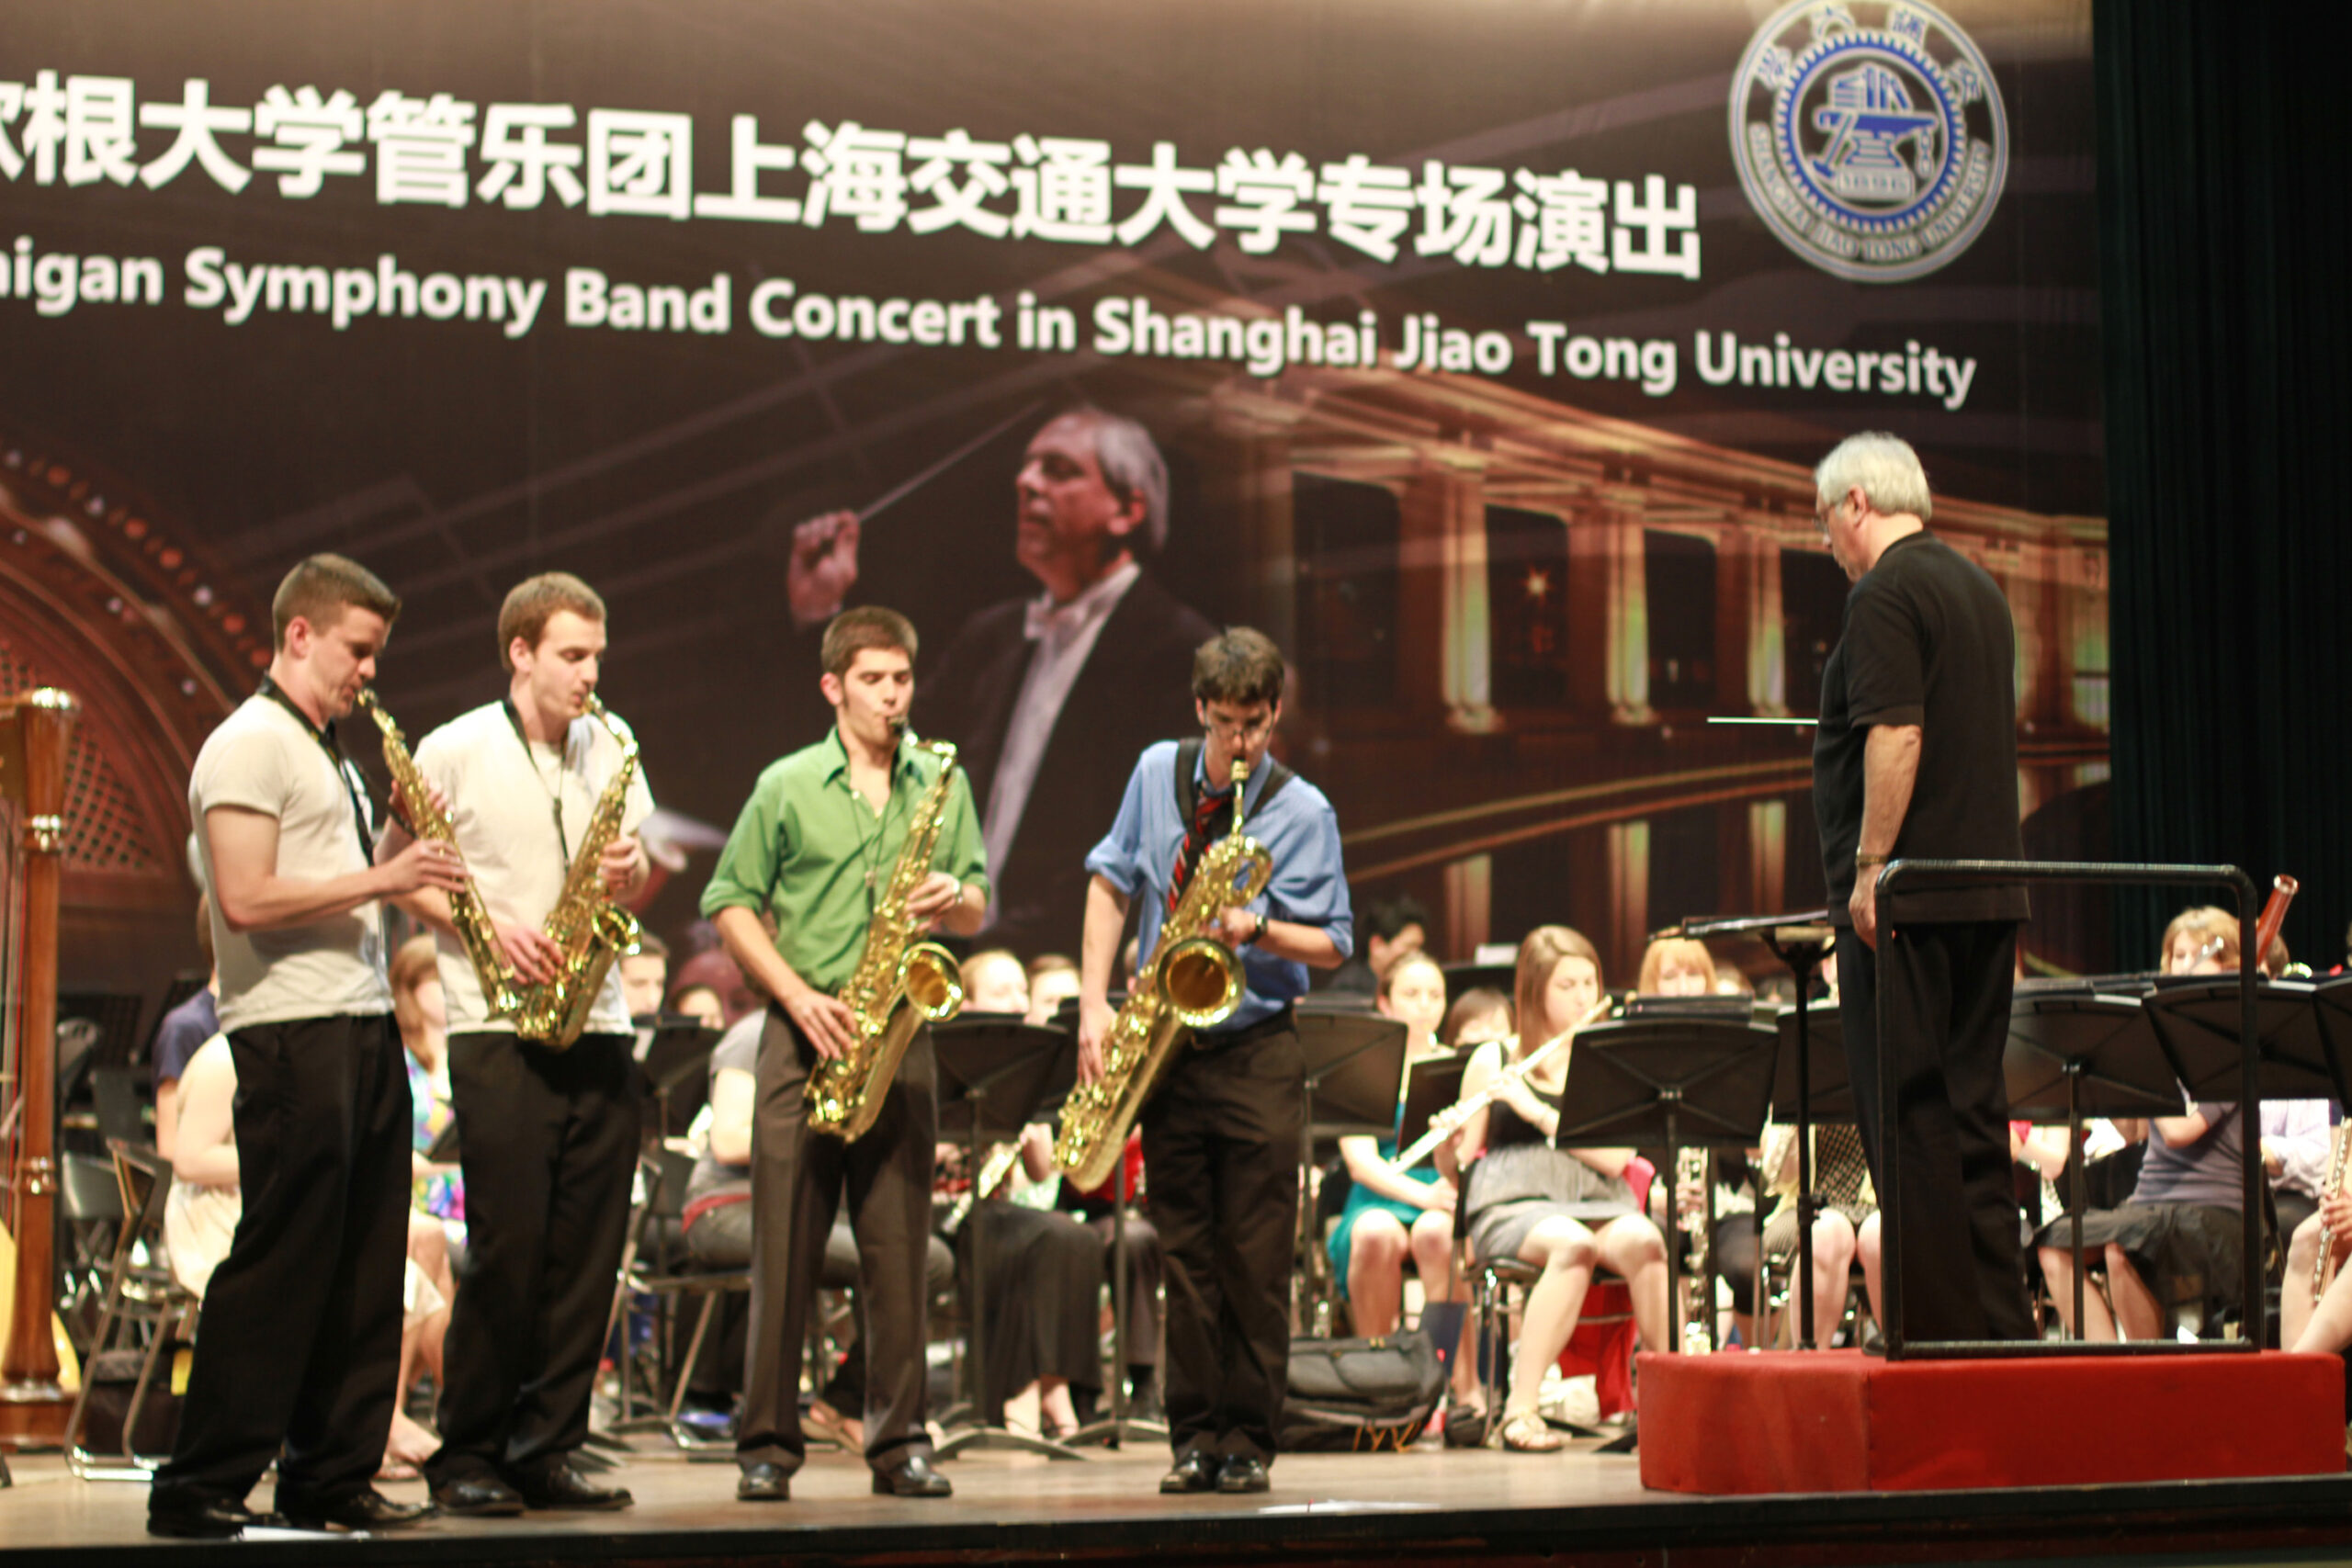 Donald Sinta saxophone quartet in front of Symphony Band. Michael Haithcock conducting. Sign says Symphony Band concert in Shanghai Jiao Tong University